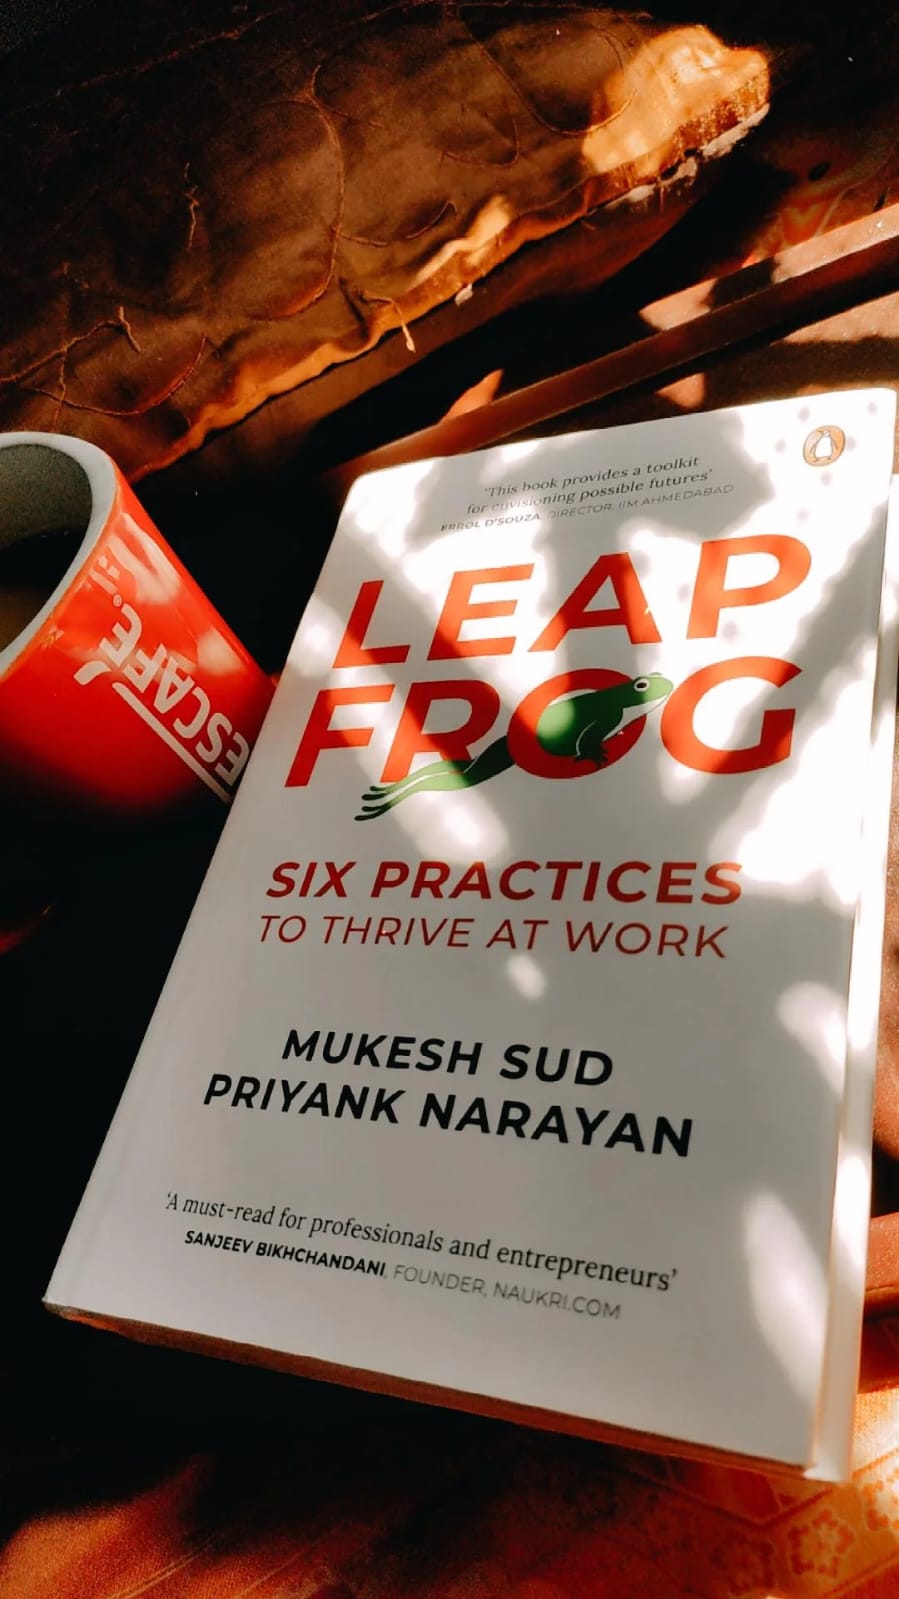 Leap Frog six practices to thrive at work By Mukesh Sud & Priyank Narayan